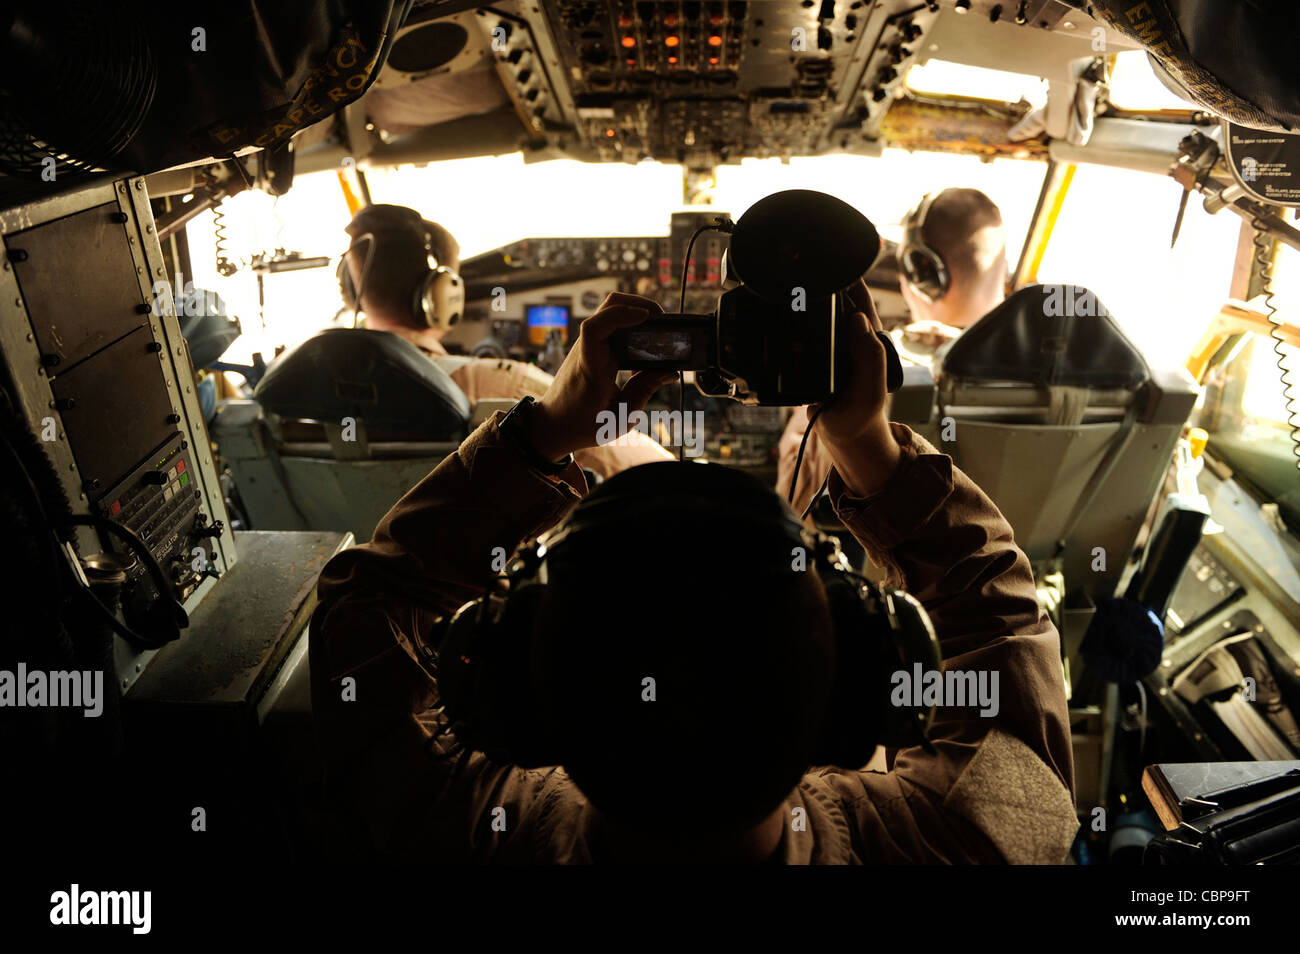 Staff Sgt. Anthony Stone documents the flight preparations of a KC-135 Stratotanker crew with the 340th Expeditionary Air Refueling Squadron in Southwest Asia. Sergeant Stone is a broadcaster assigned to the Air Forces Central Combat Camera Team. Stock Photo